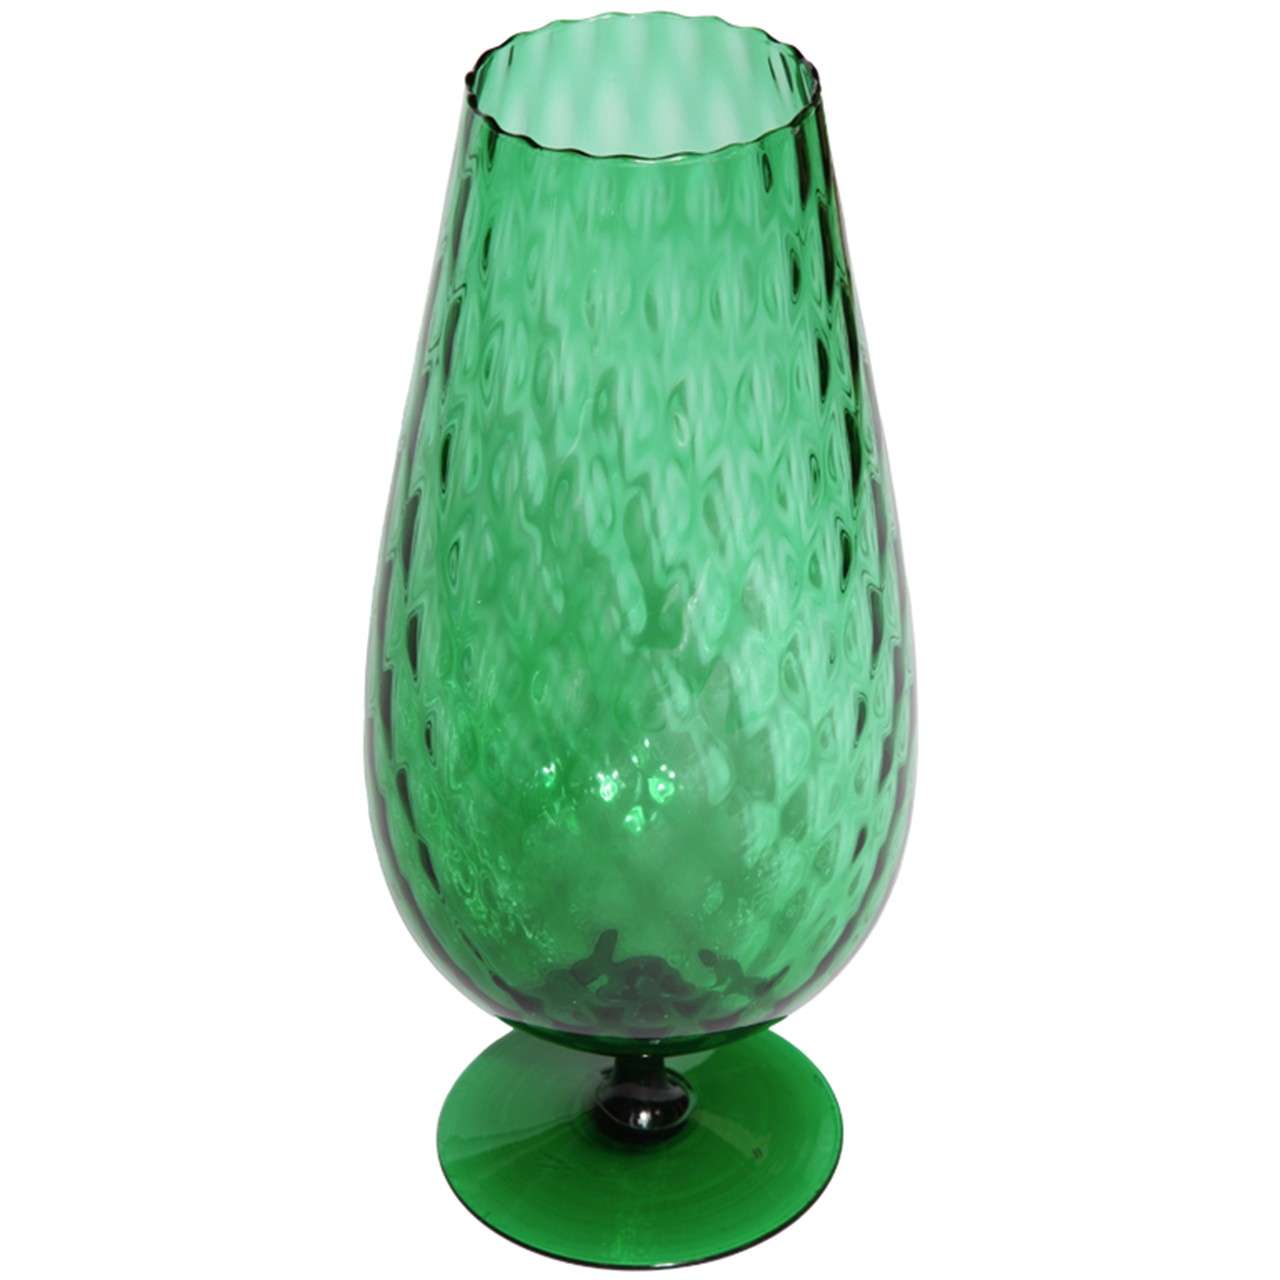 A striking large glass vase by Empoli in emerald green.